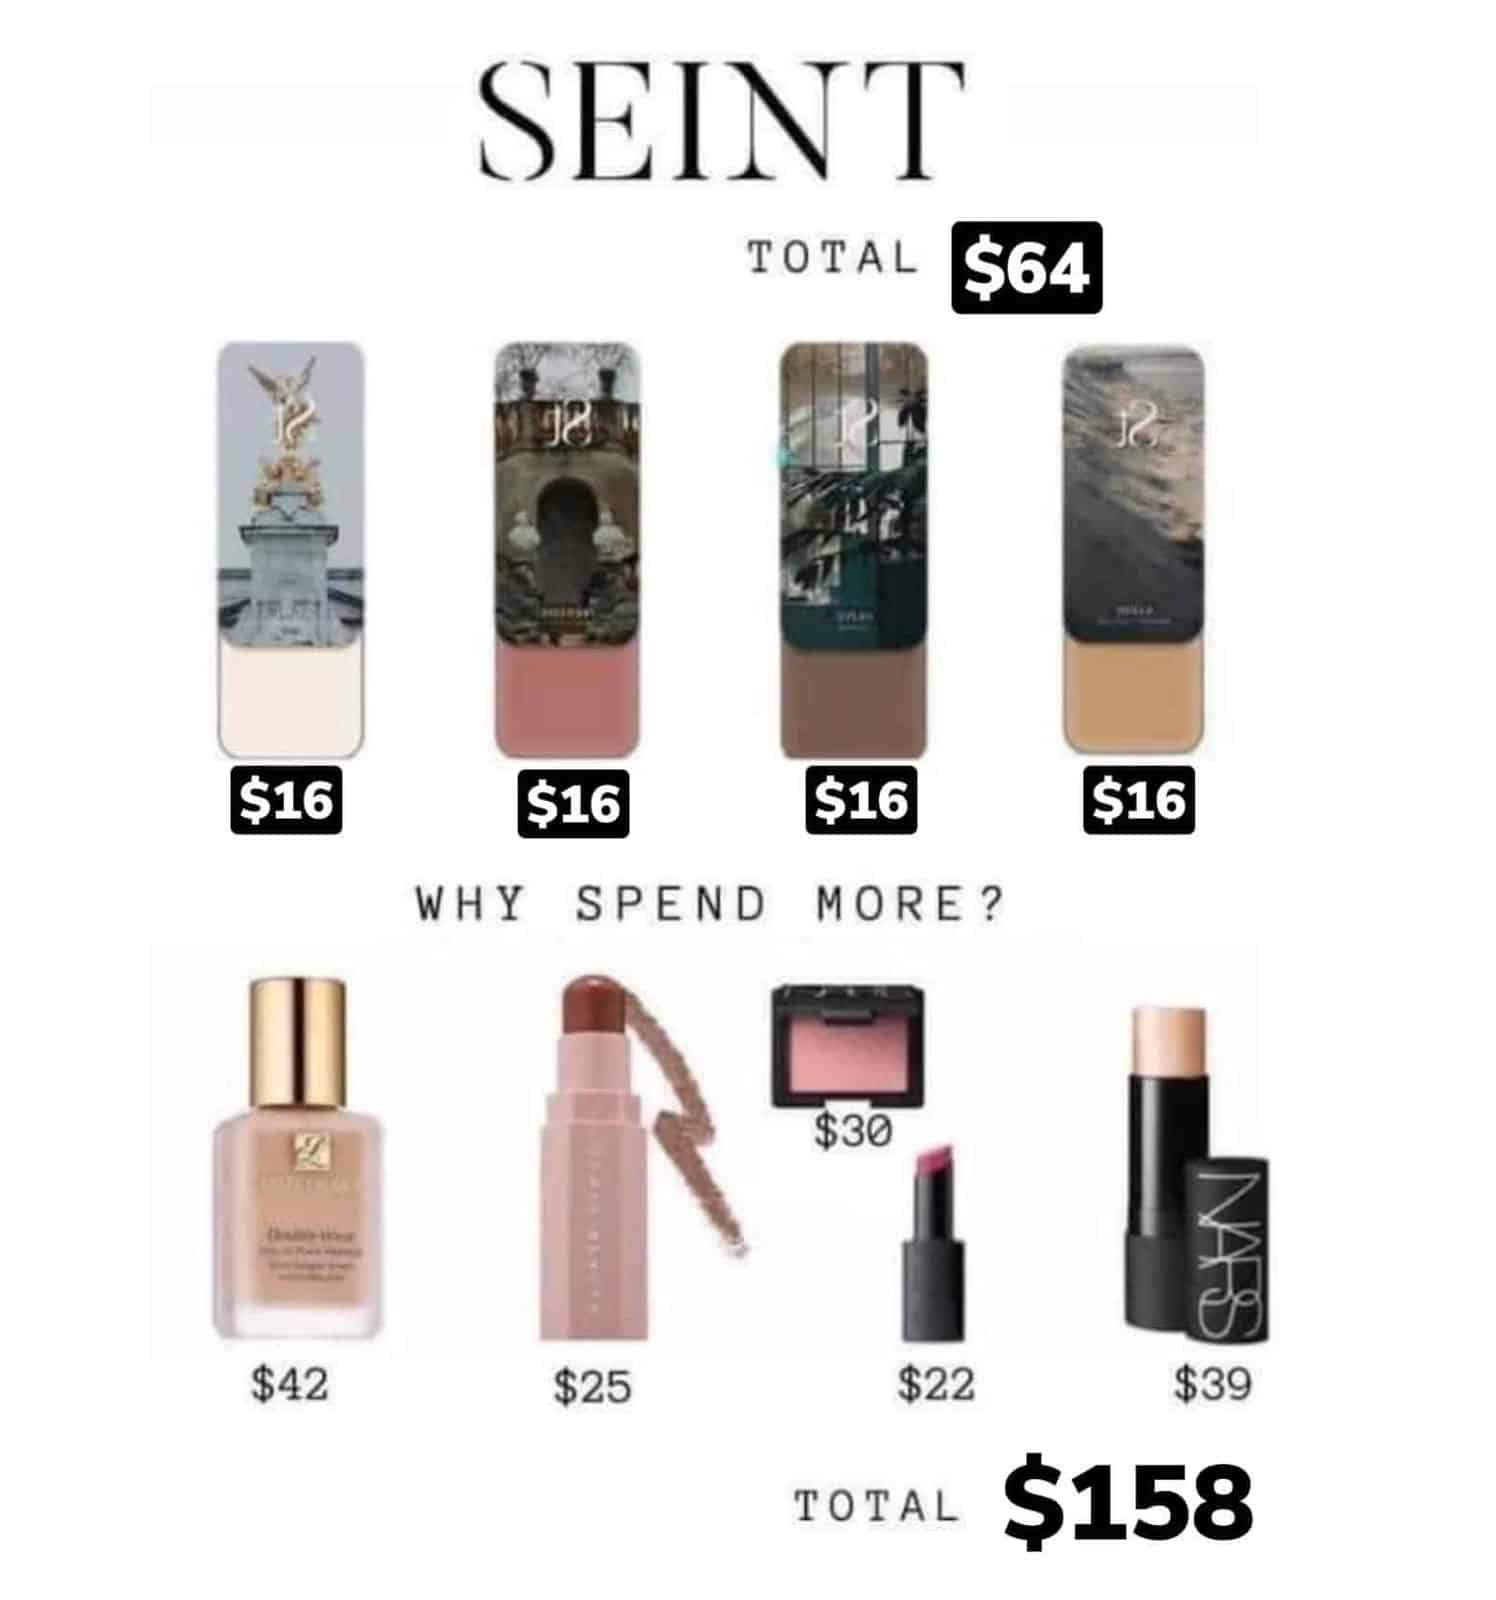 How Much is Seint Makeup? Find Out the Price and Benefits